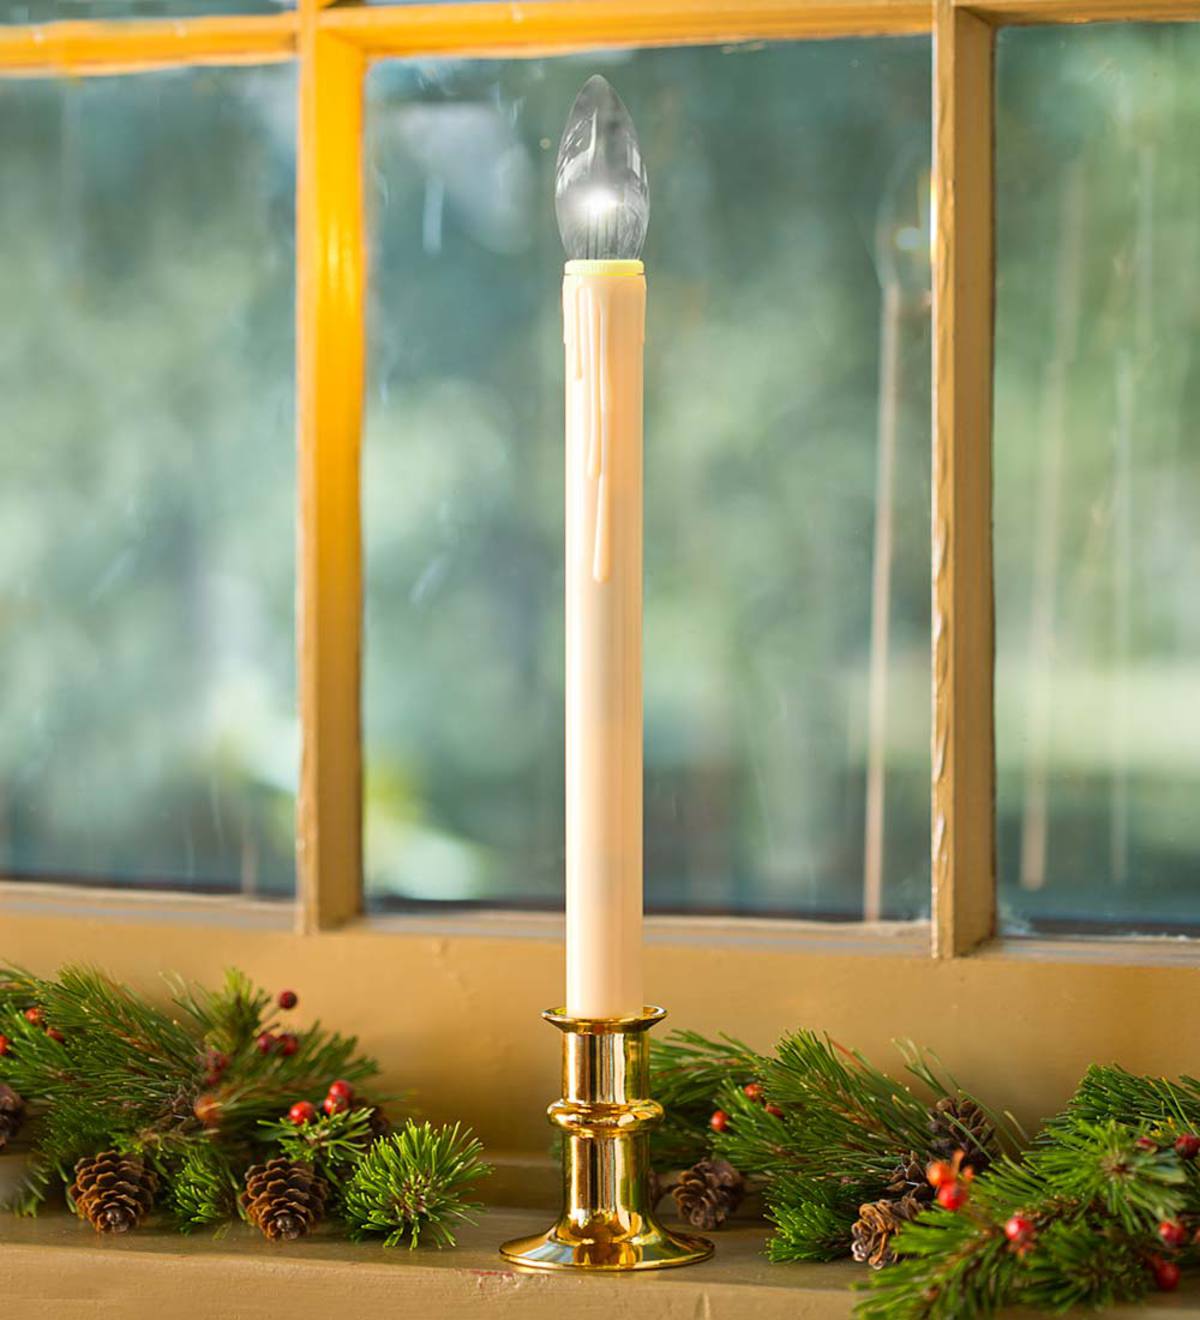 Adjustable Window Candle with Auto Timer